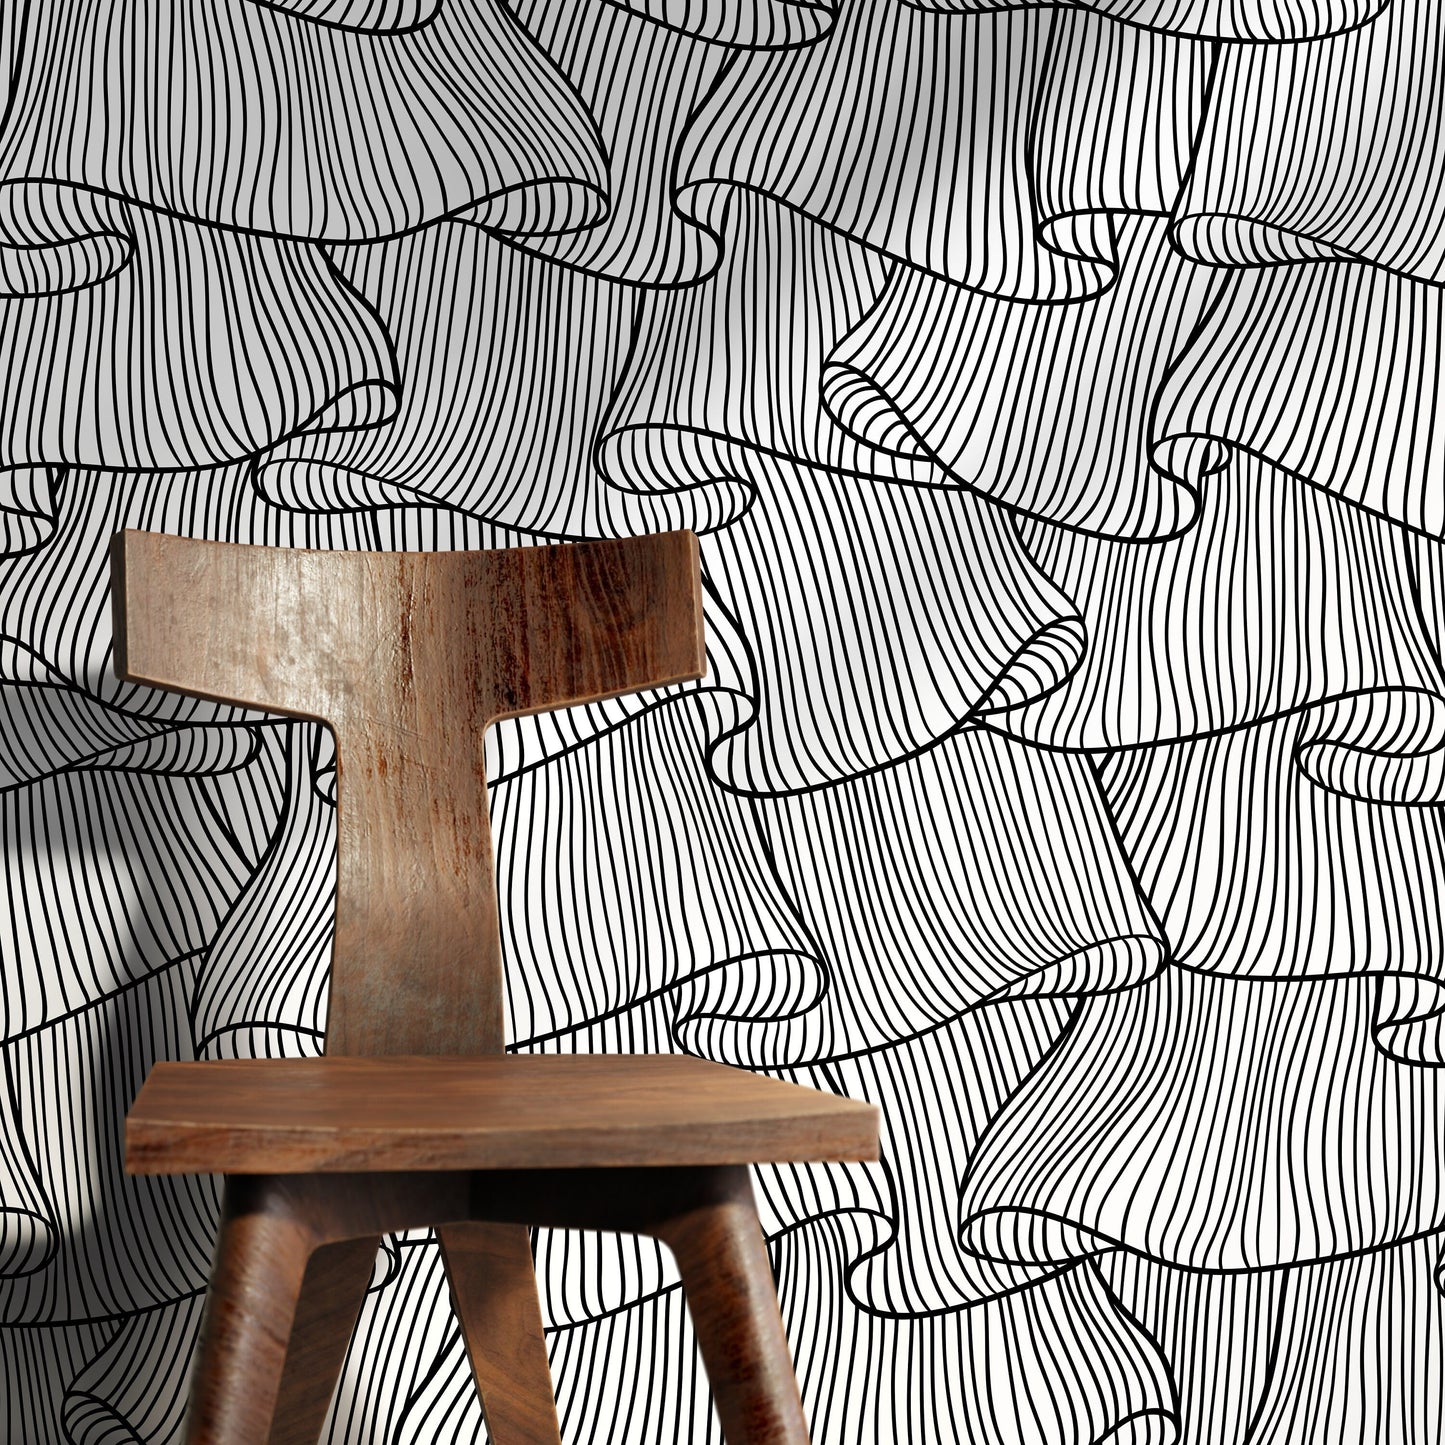 Wallpaper Peel and Stick Wallpaper Removable Wallpaper Home Decor Wall Art Wall Decor Room Decor / Lines Black and White Wallpaper - C424